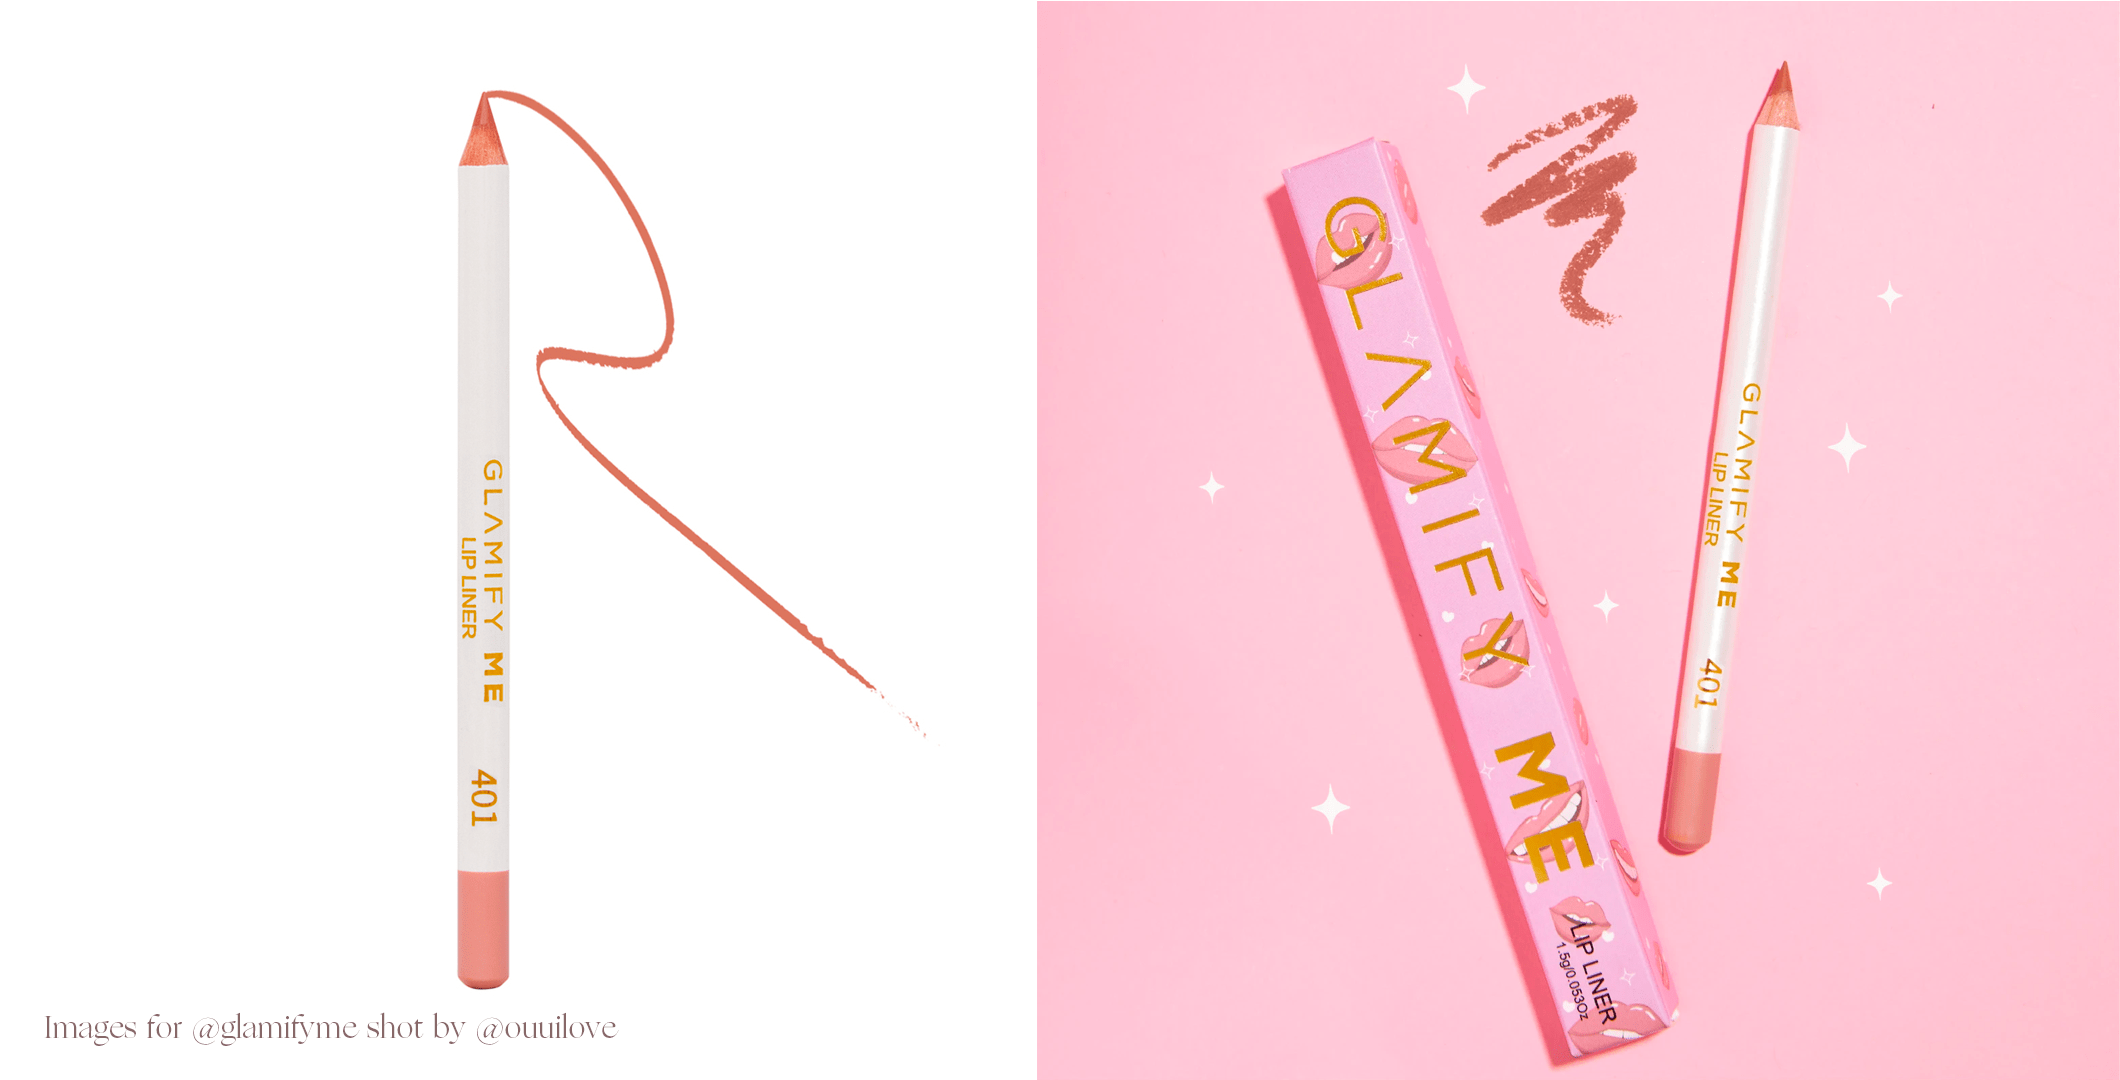 Want to Open an Online Store? Here’s 5 Things to Consider: A product image for  Glamify Me lip liner with a blank background next to another product image for Glamify Me lip liner with a pink background.